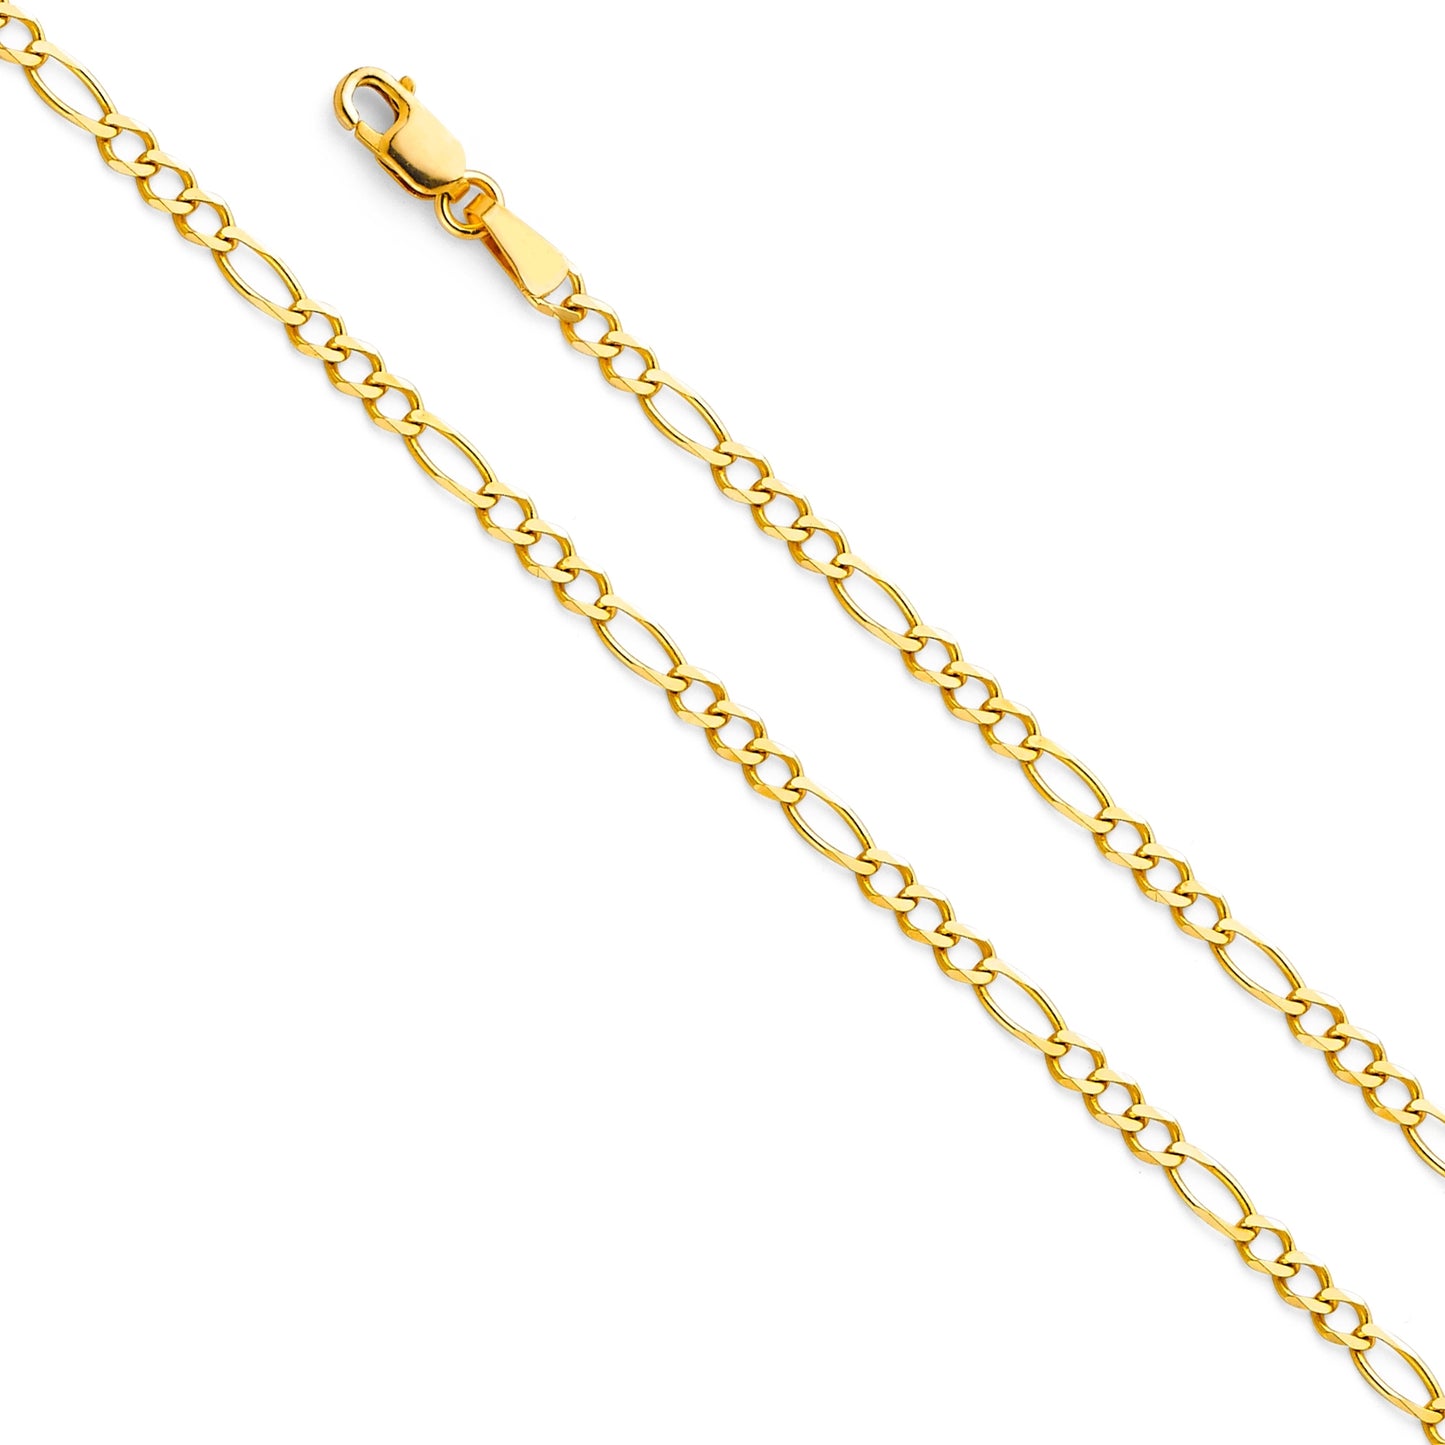 14K Solid Yellow Gold Heavy Figaro Chain 3mm thick 16 Inches.  Made in Italy